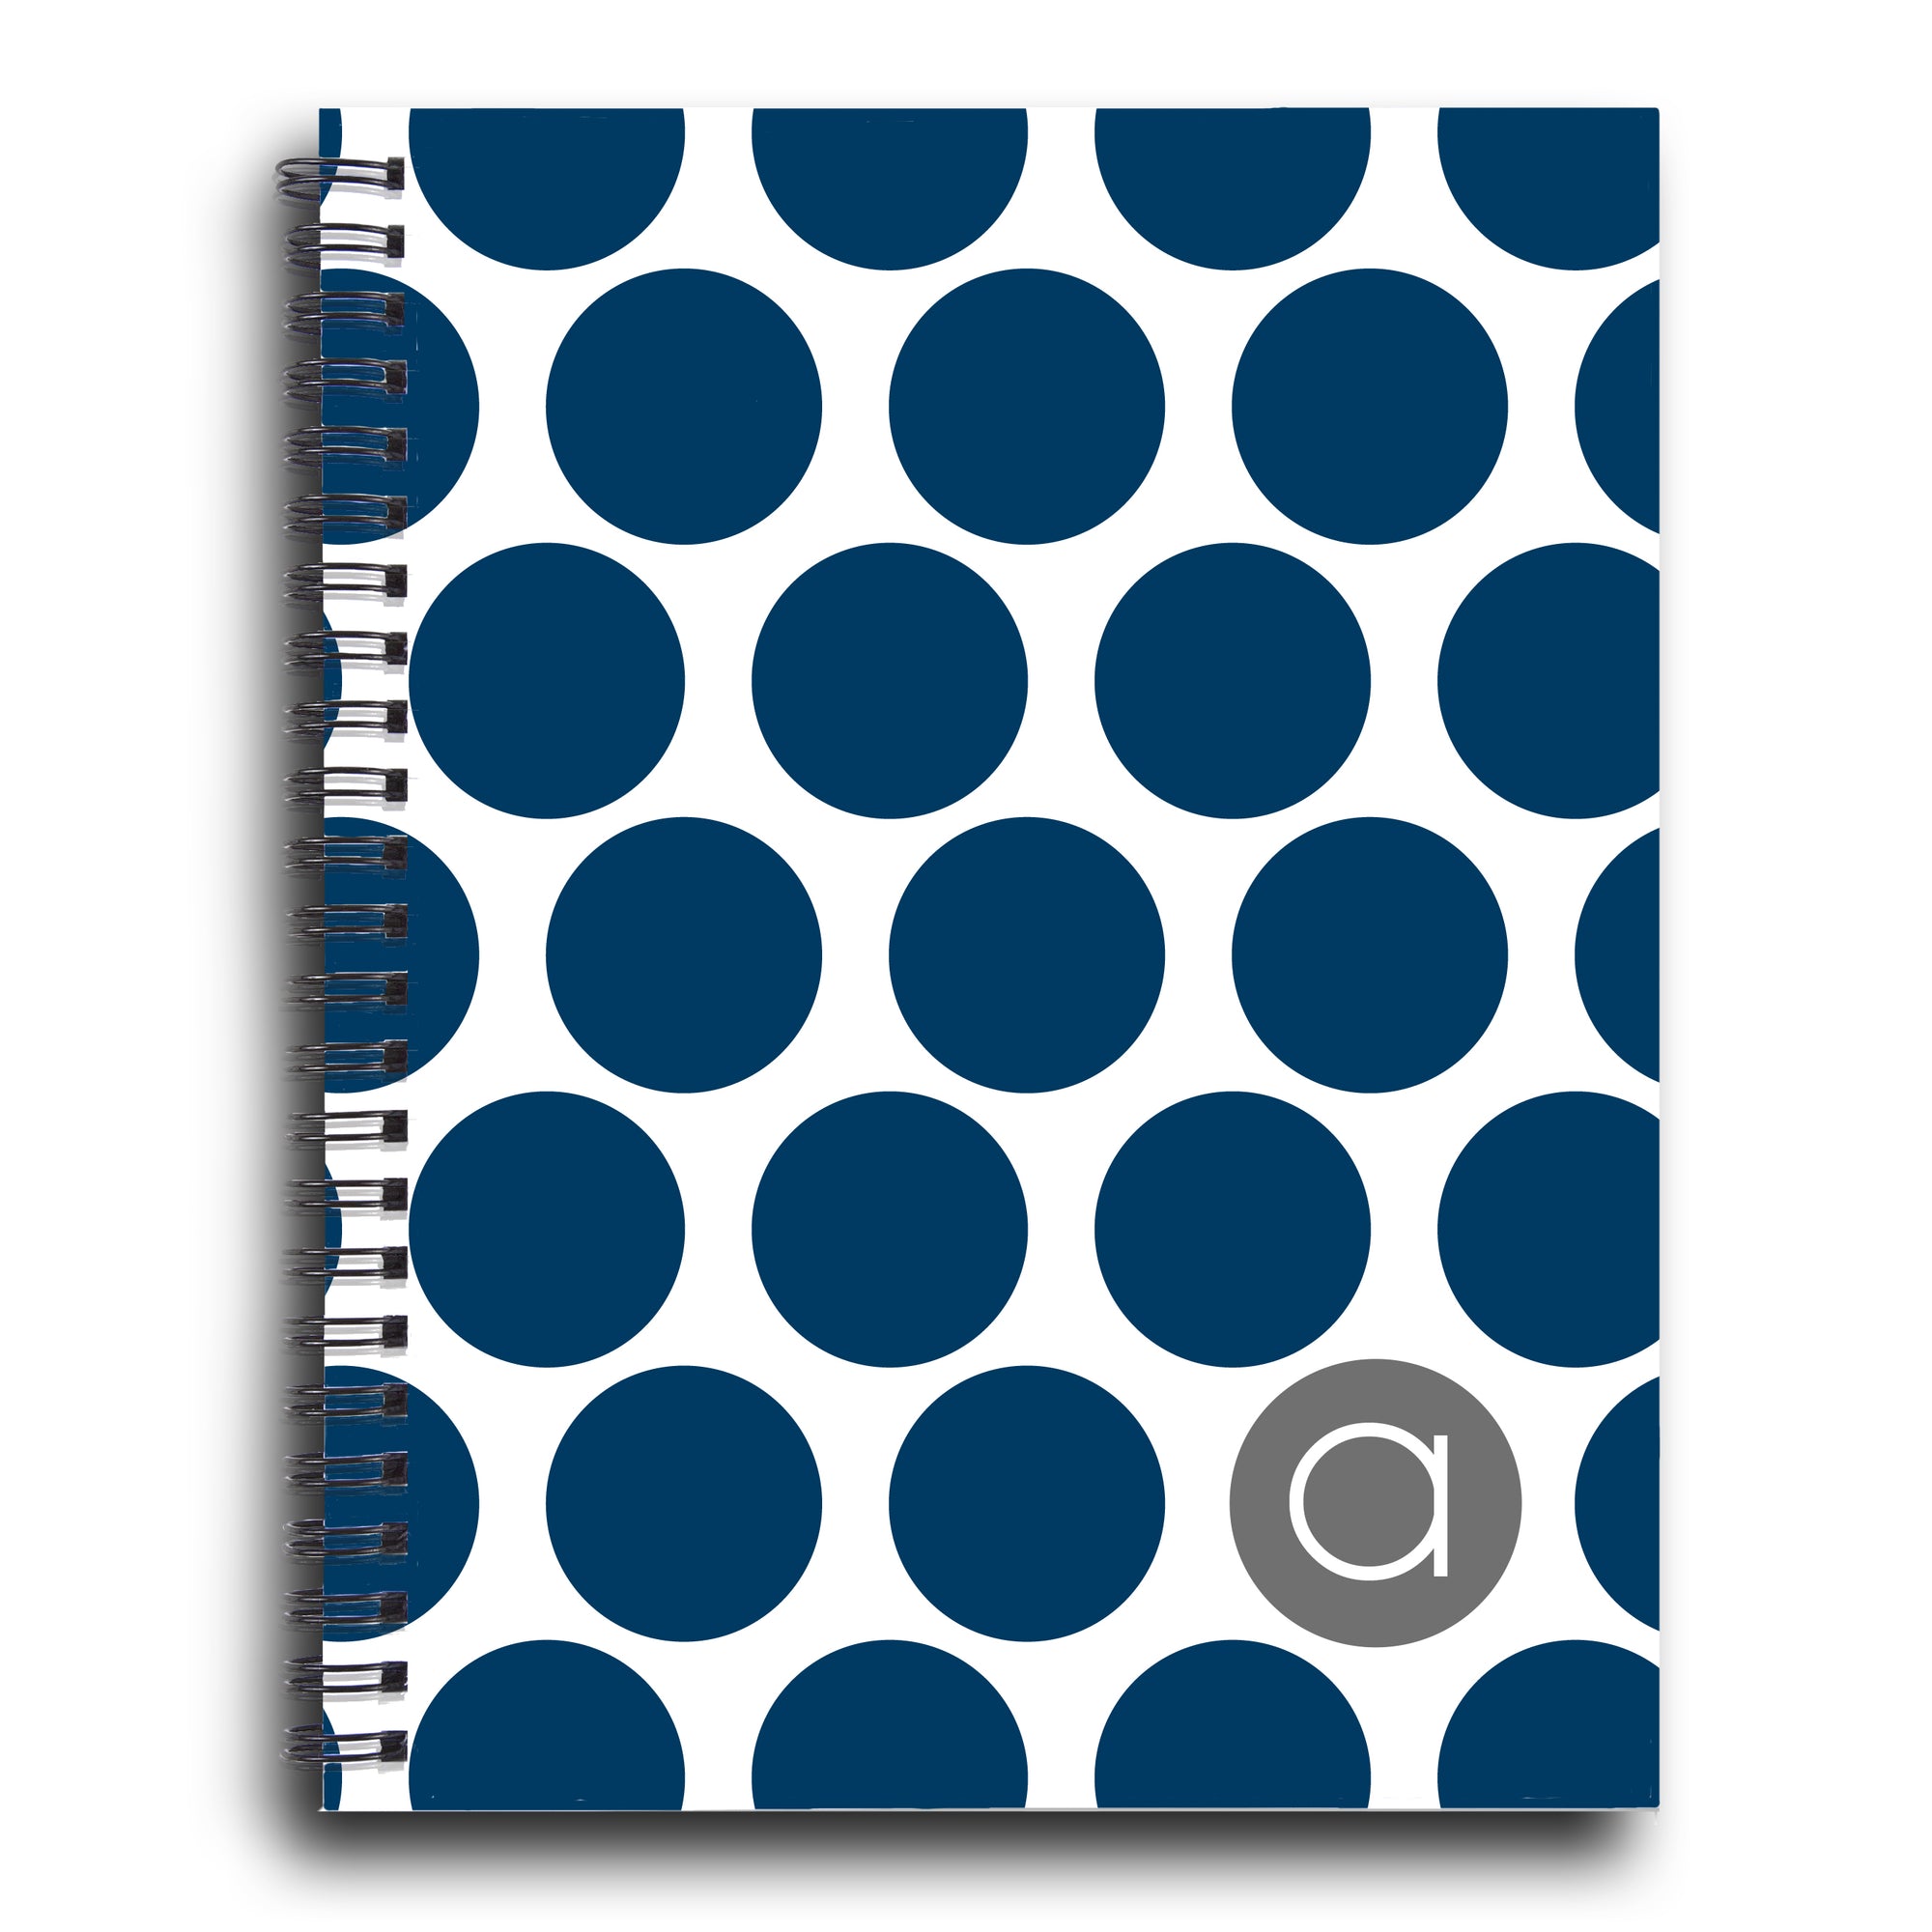 Big dotty Spiral Notebook, Navy Blue and Gray, Personalized, PIPSY.COM